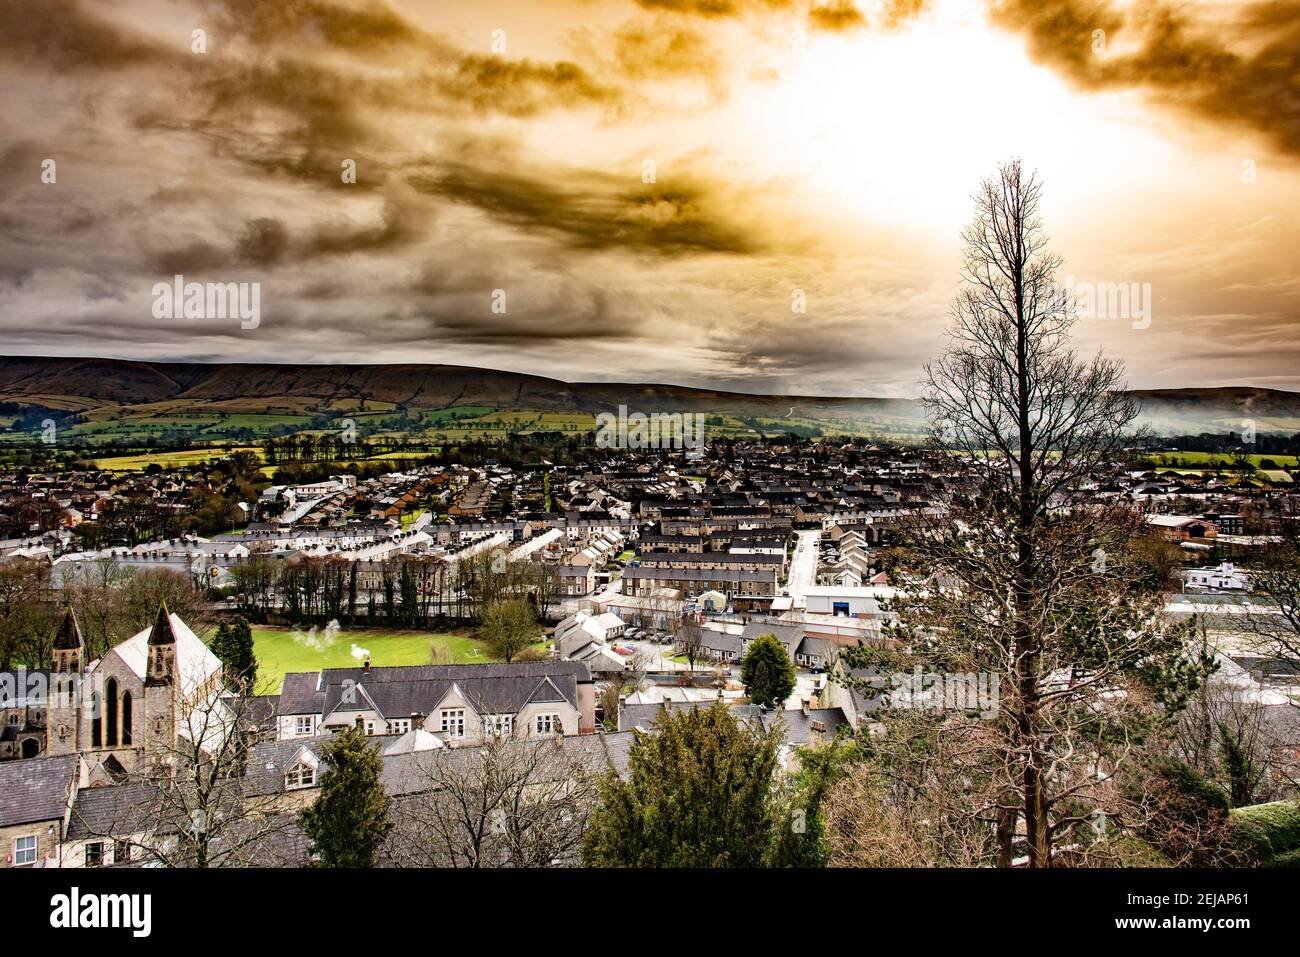 Clitheroe, Lancashire, UK.  22nd February 2021  The sun trying to break through the clouds at Clitheroe, Lancashire.  Credit John Eveson/Alamy Live News. Stock Photo